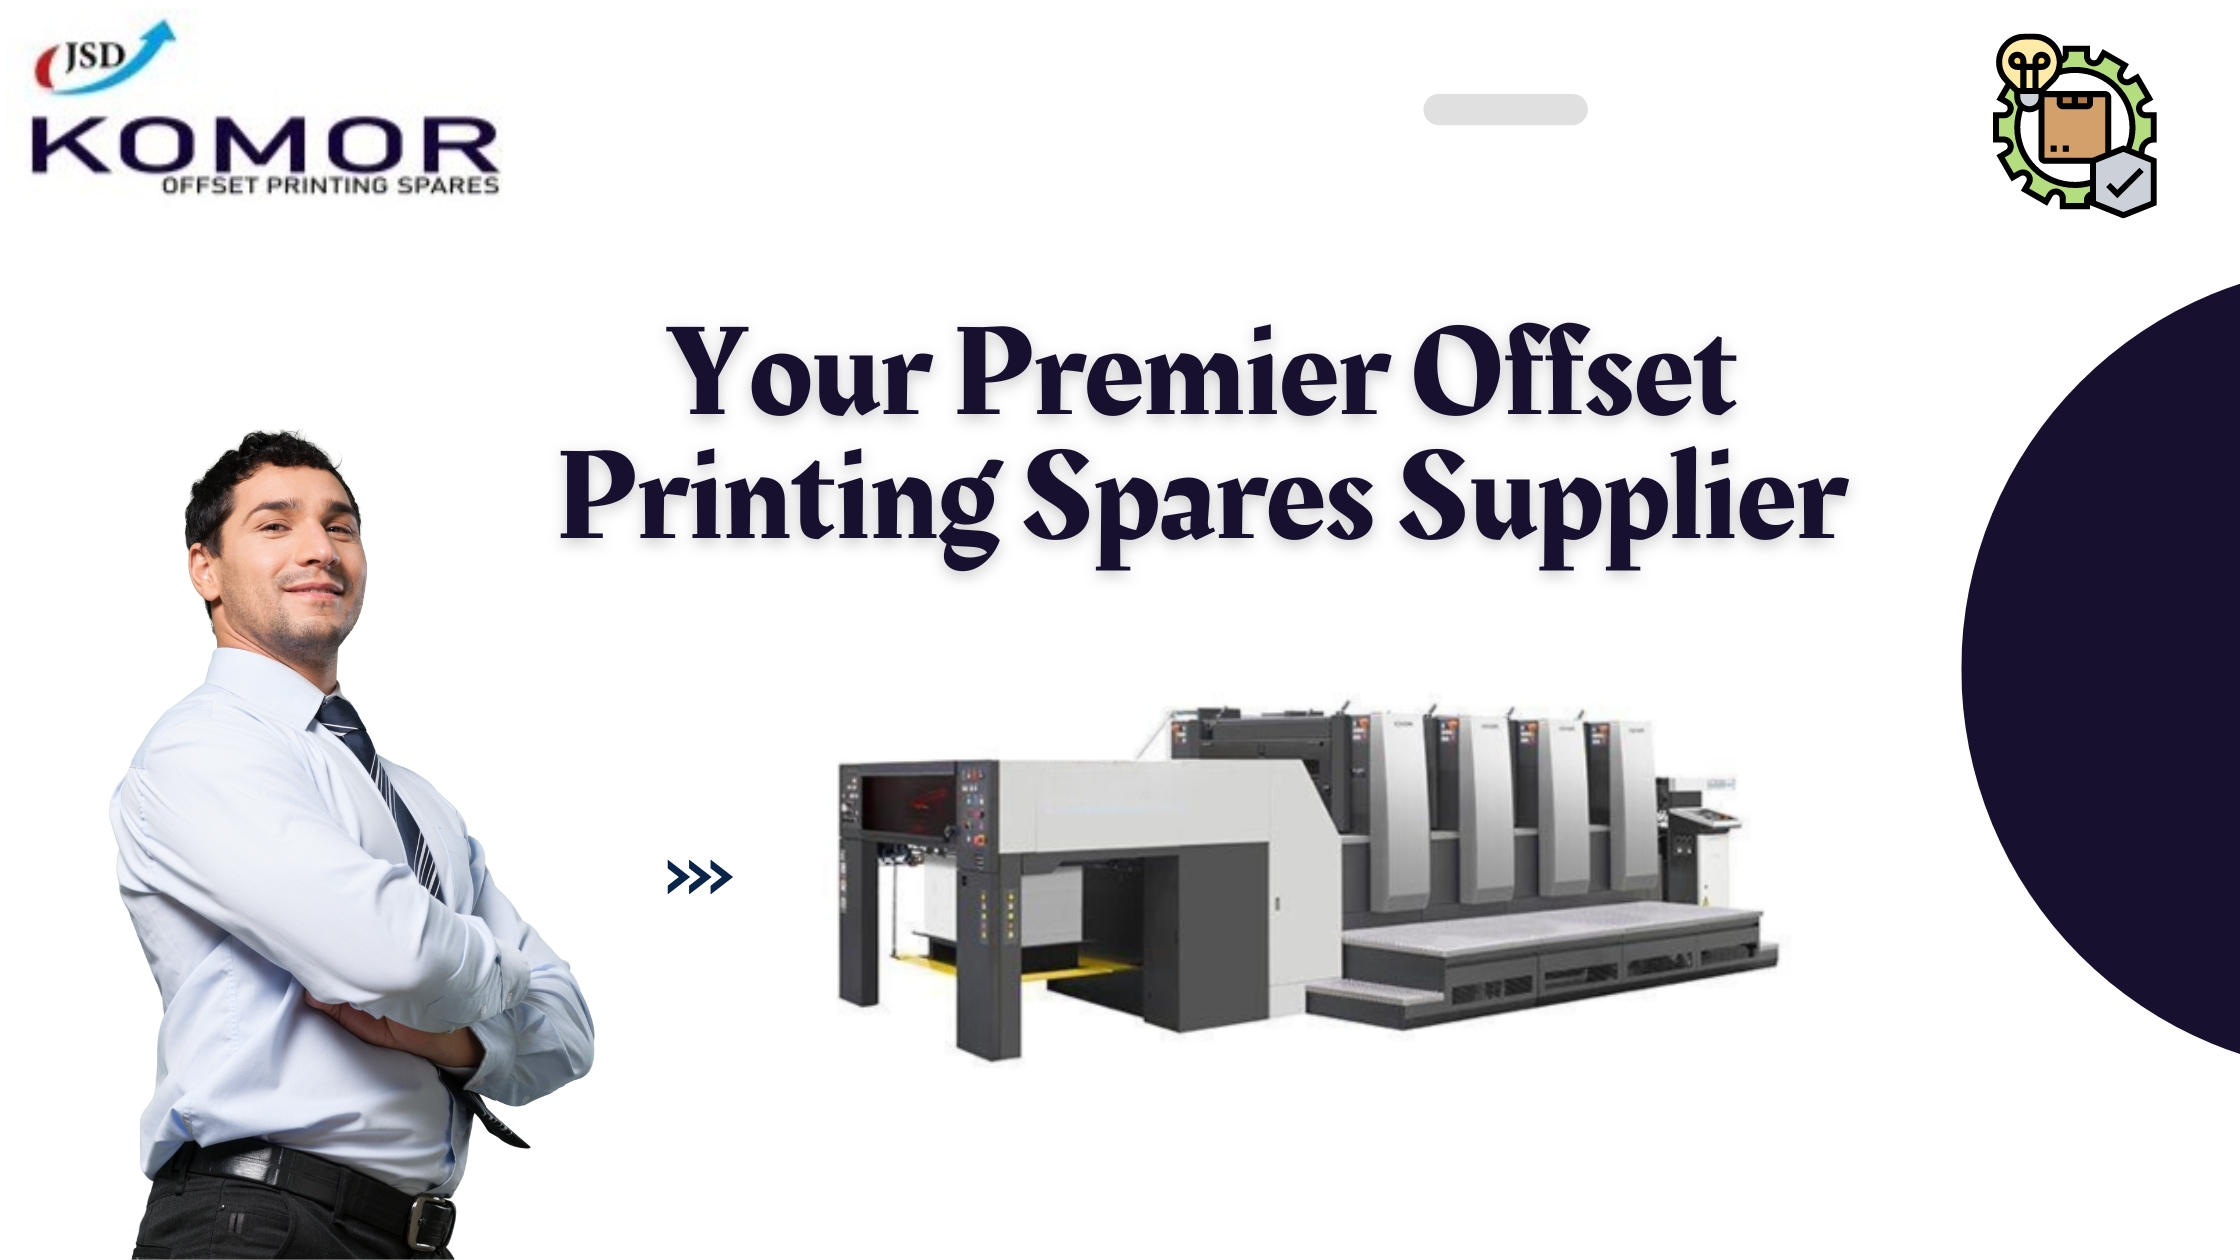 Your Premier Offset Printing Spares Supplier